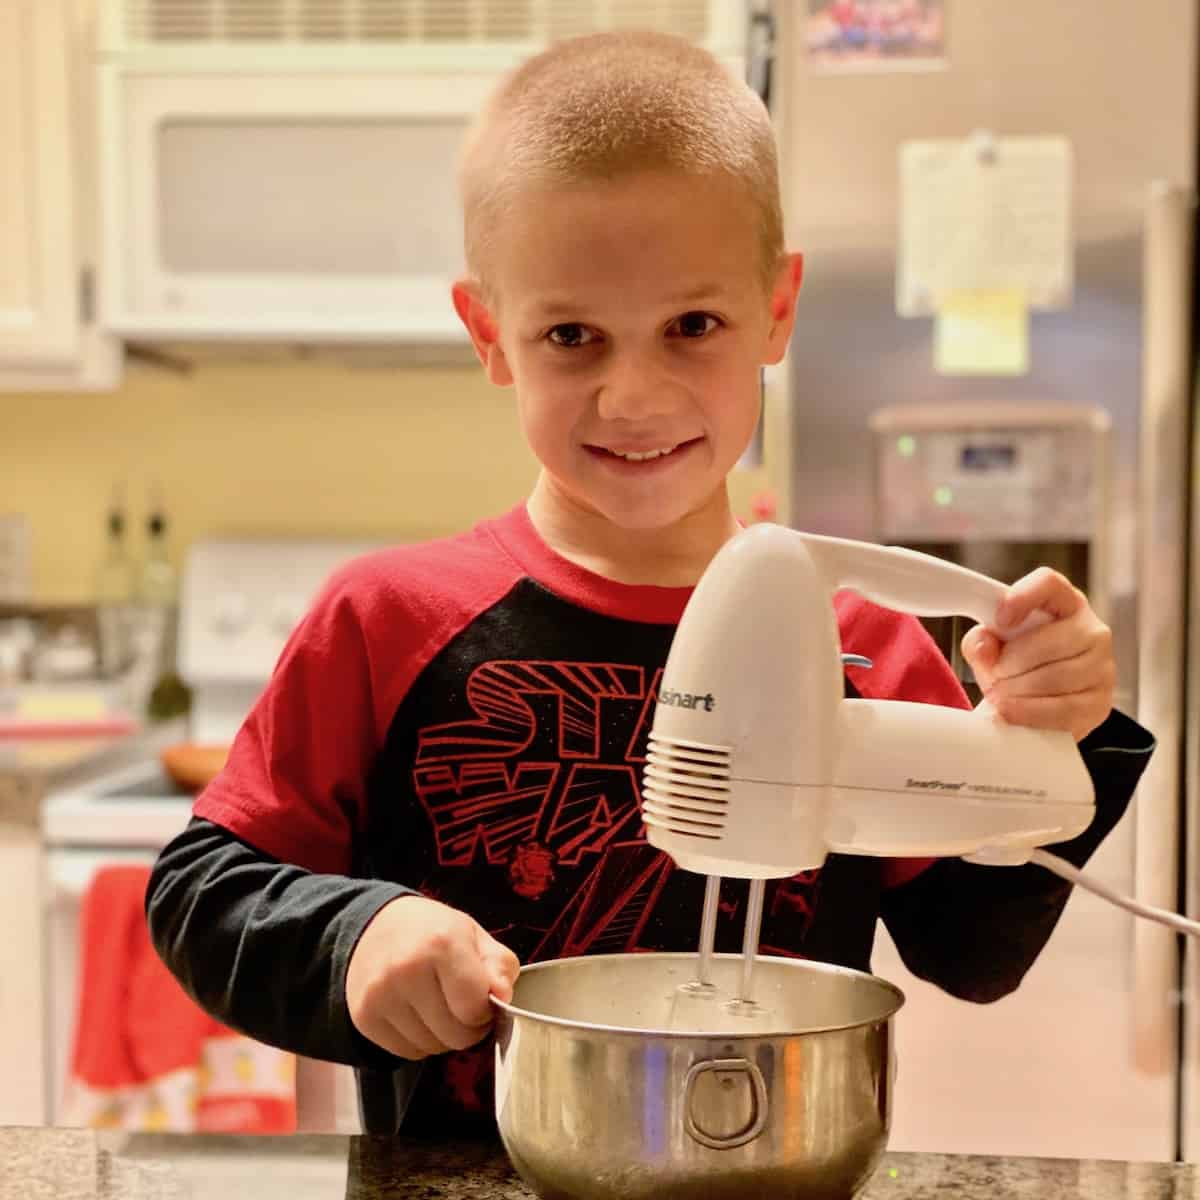 Kid holding a hand mixer whipping up something in a bowl.